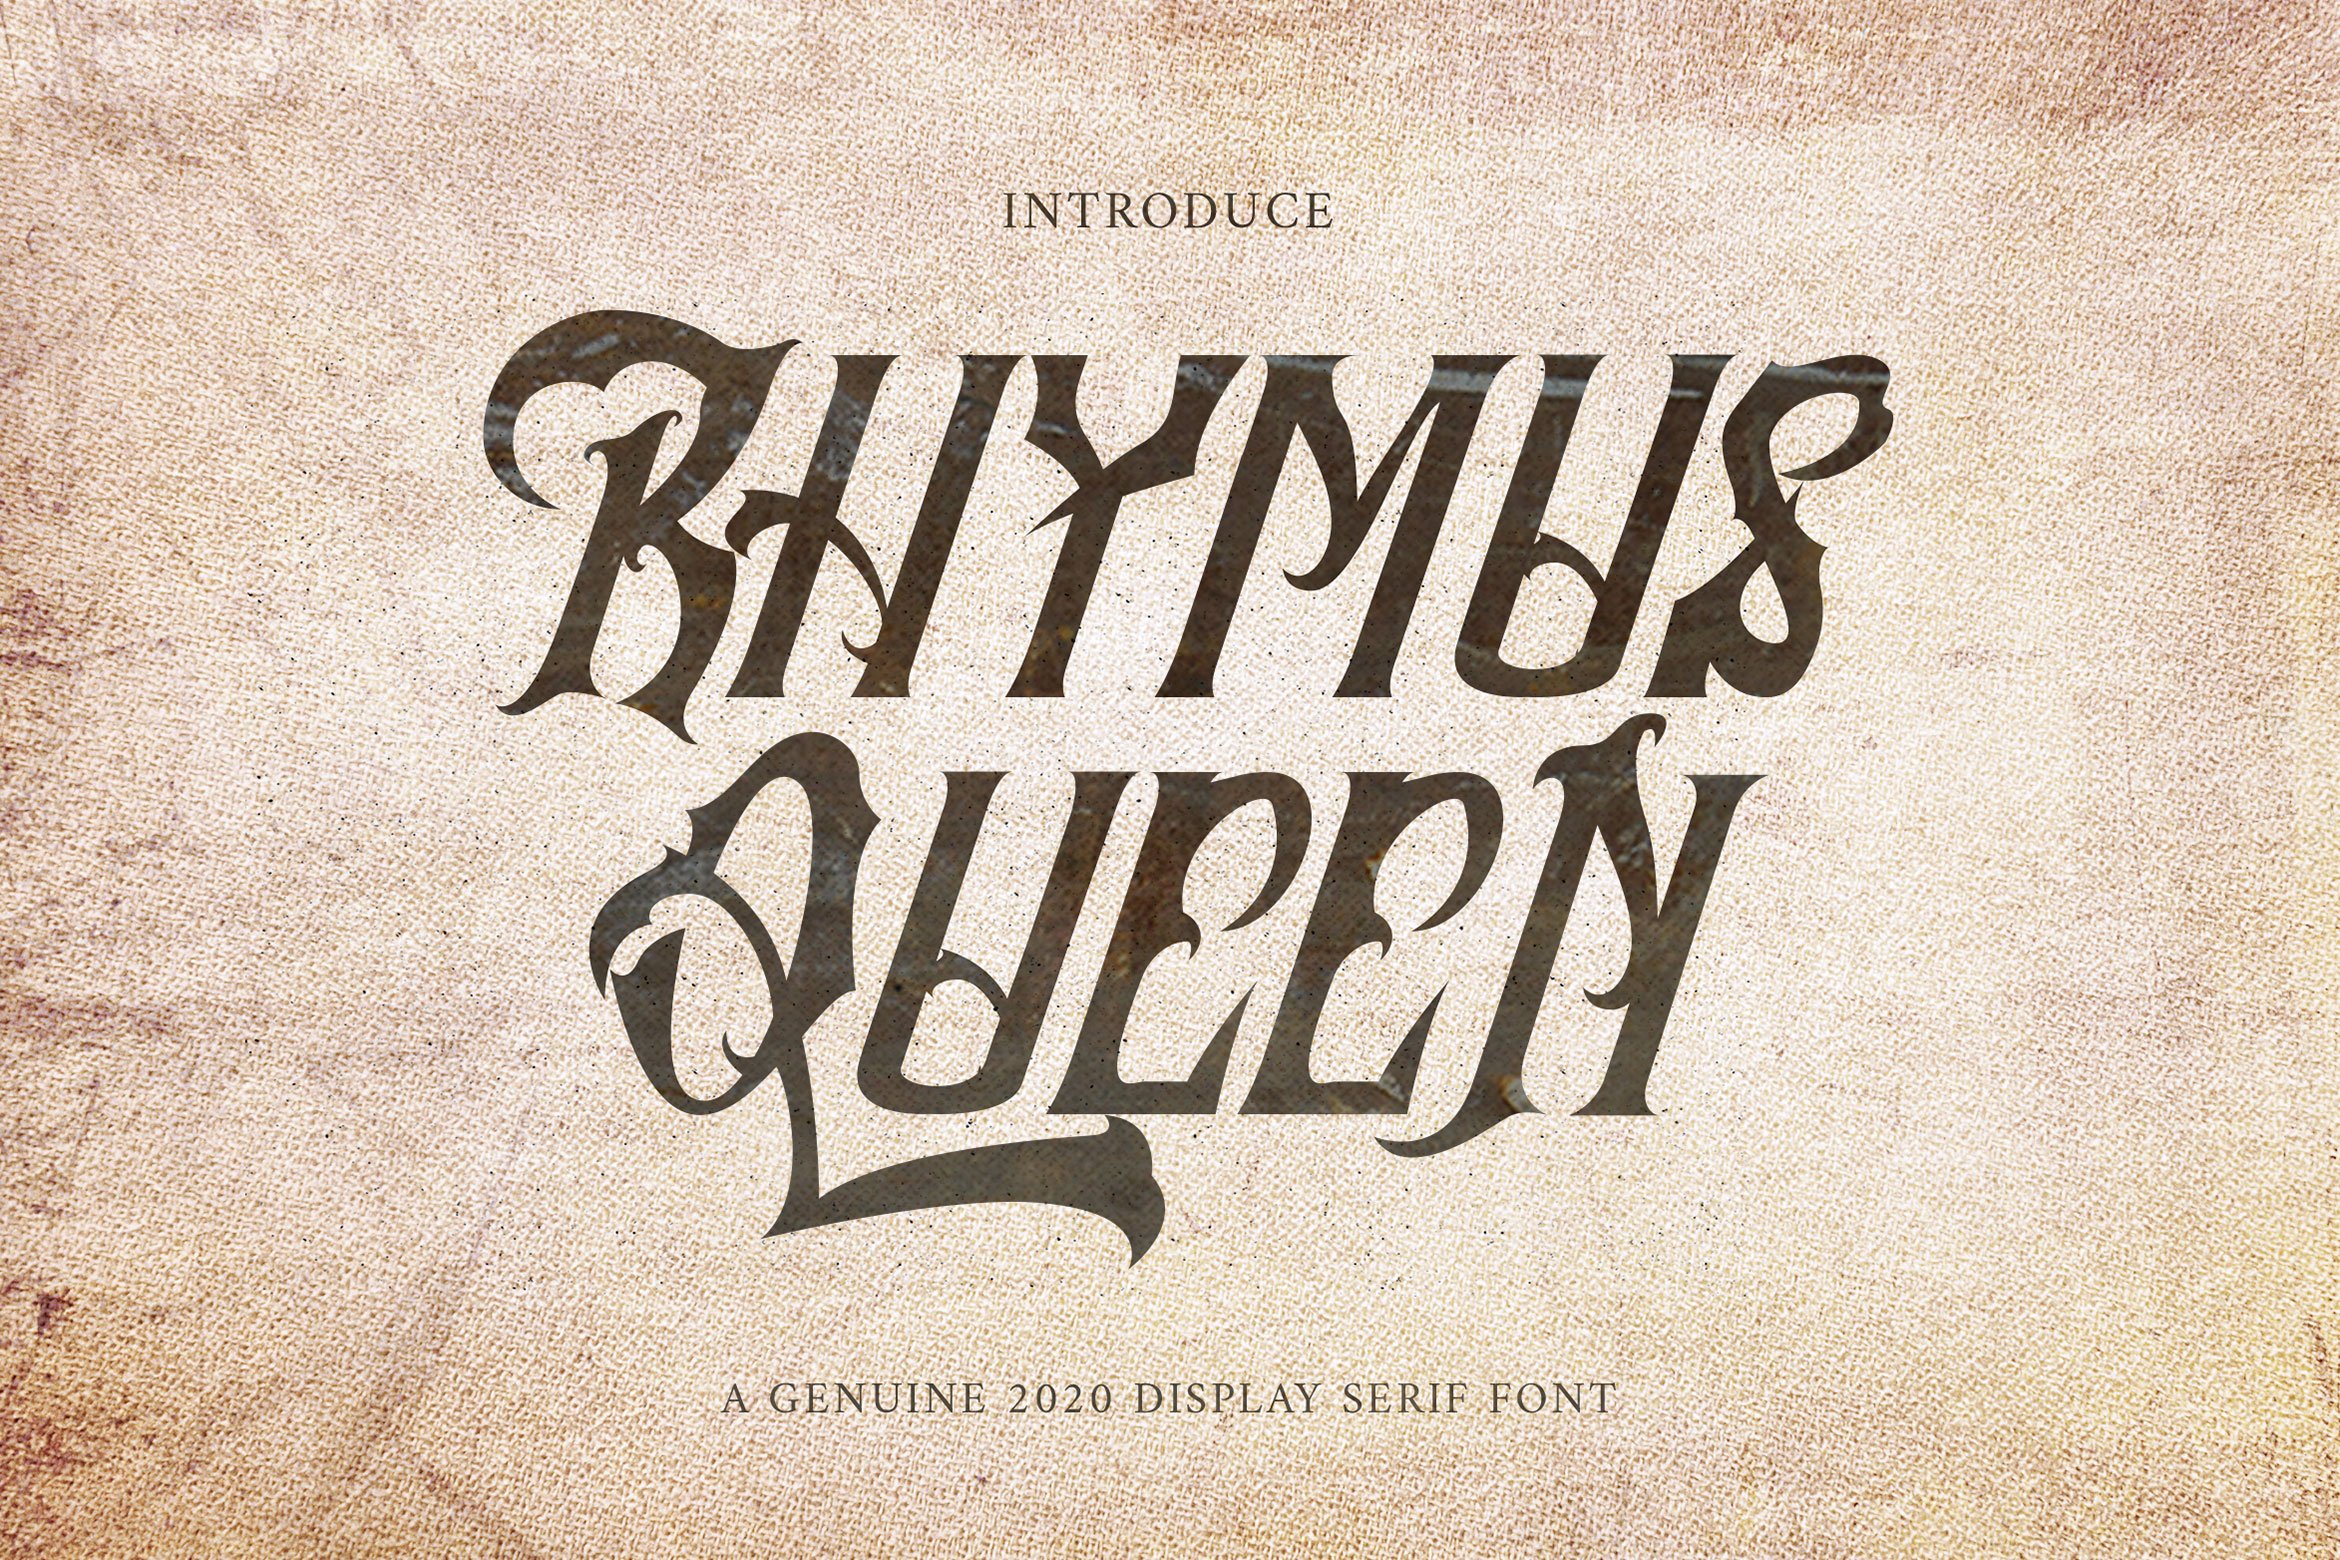 Rhymus Queen - Gothic BlackLetter cover image.